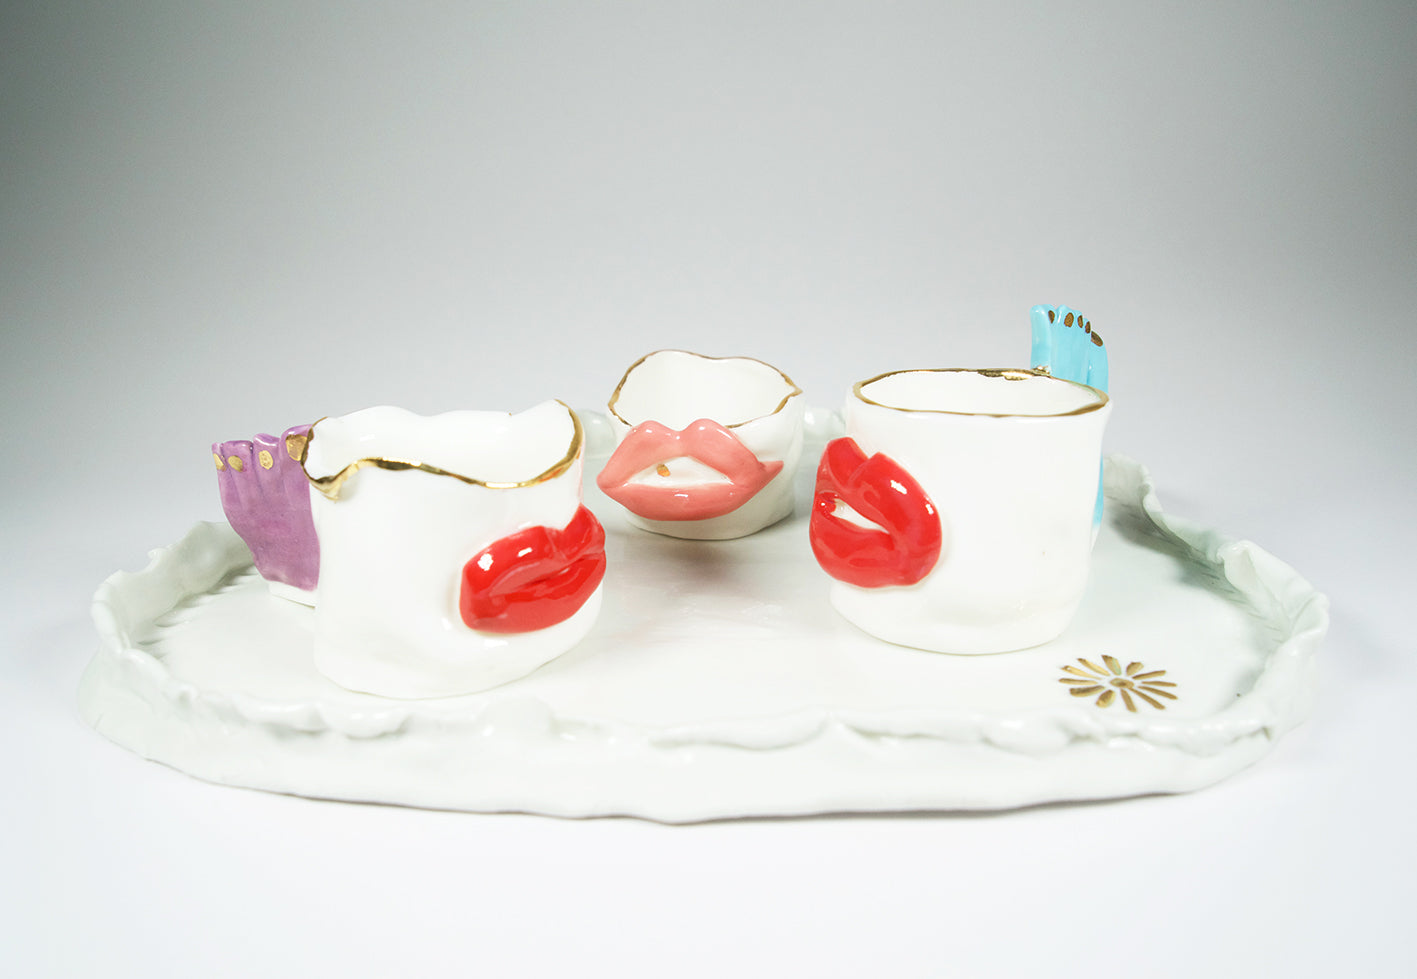 Lips Espresso Cups with Tray